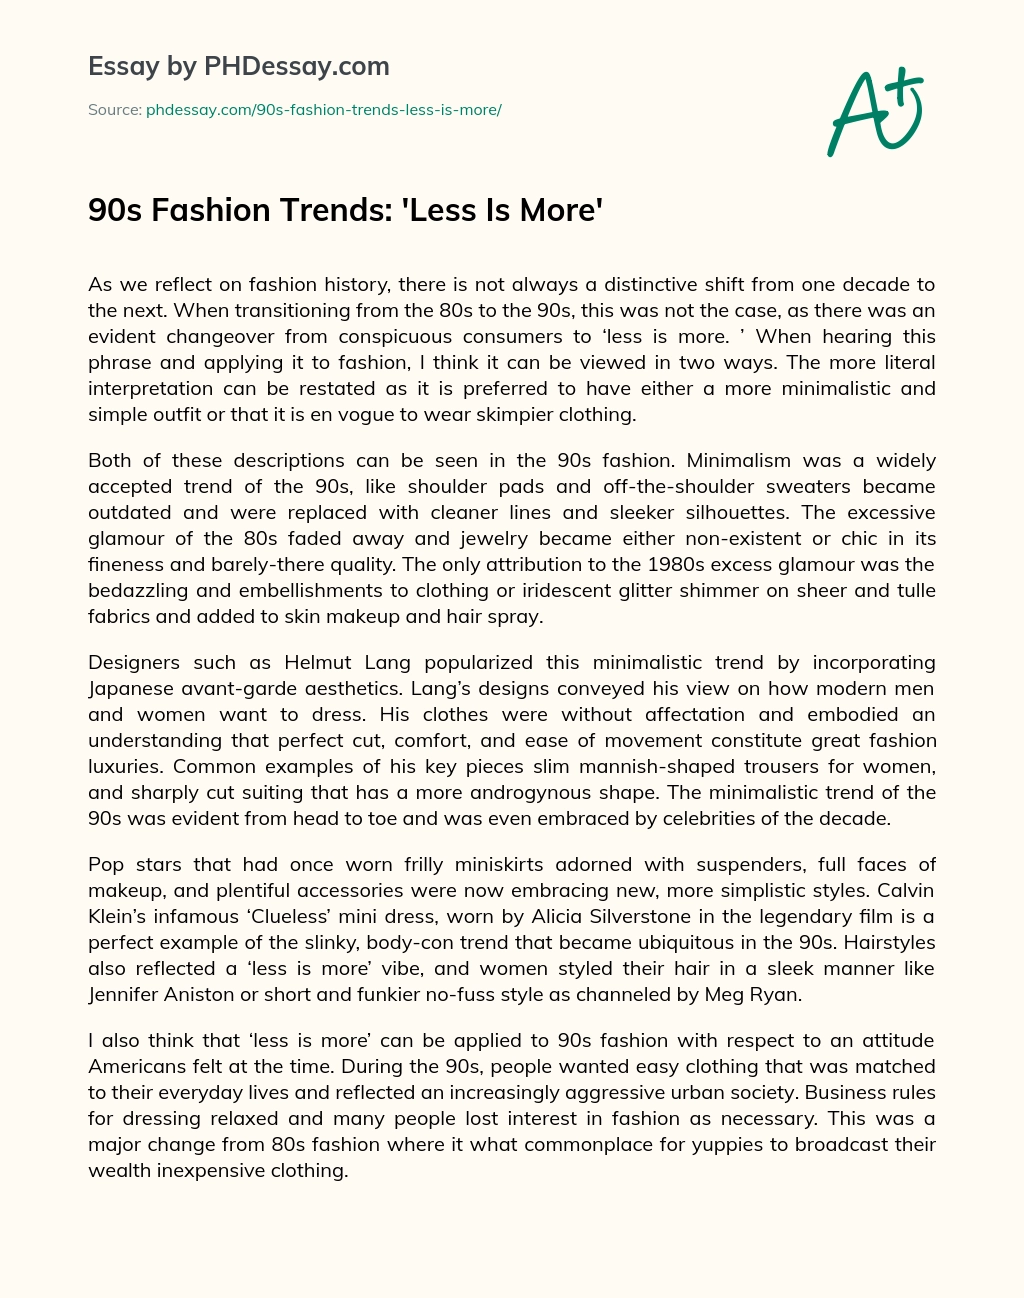 90s Fashion Trends: ‘Less Is More’ essay